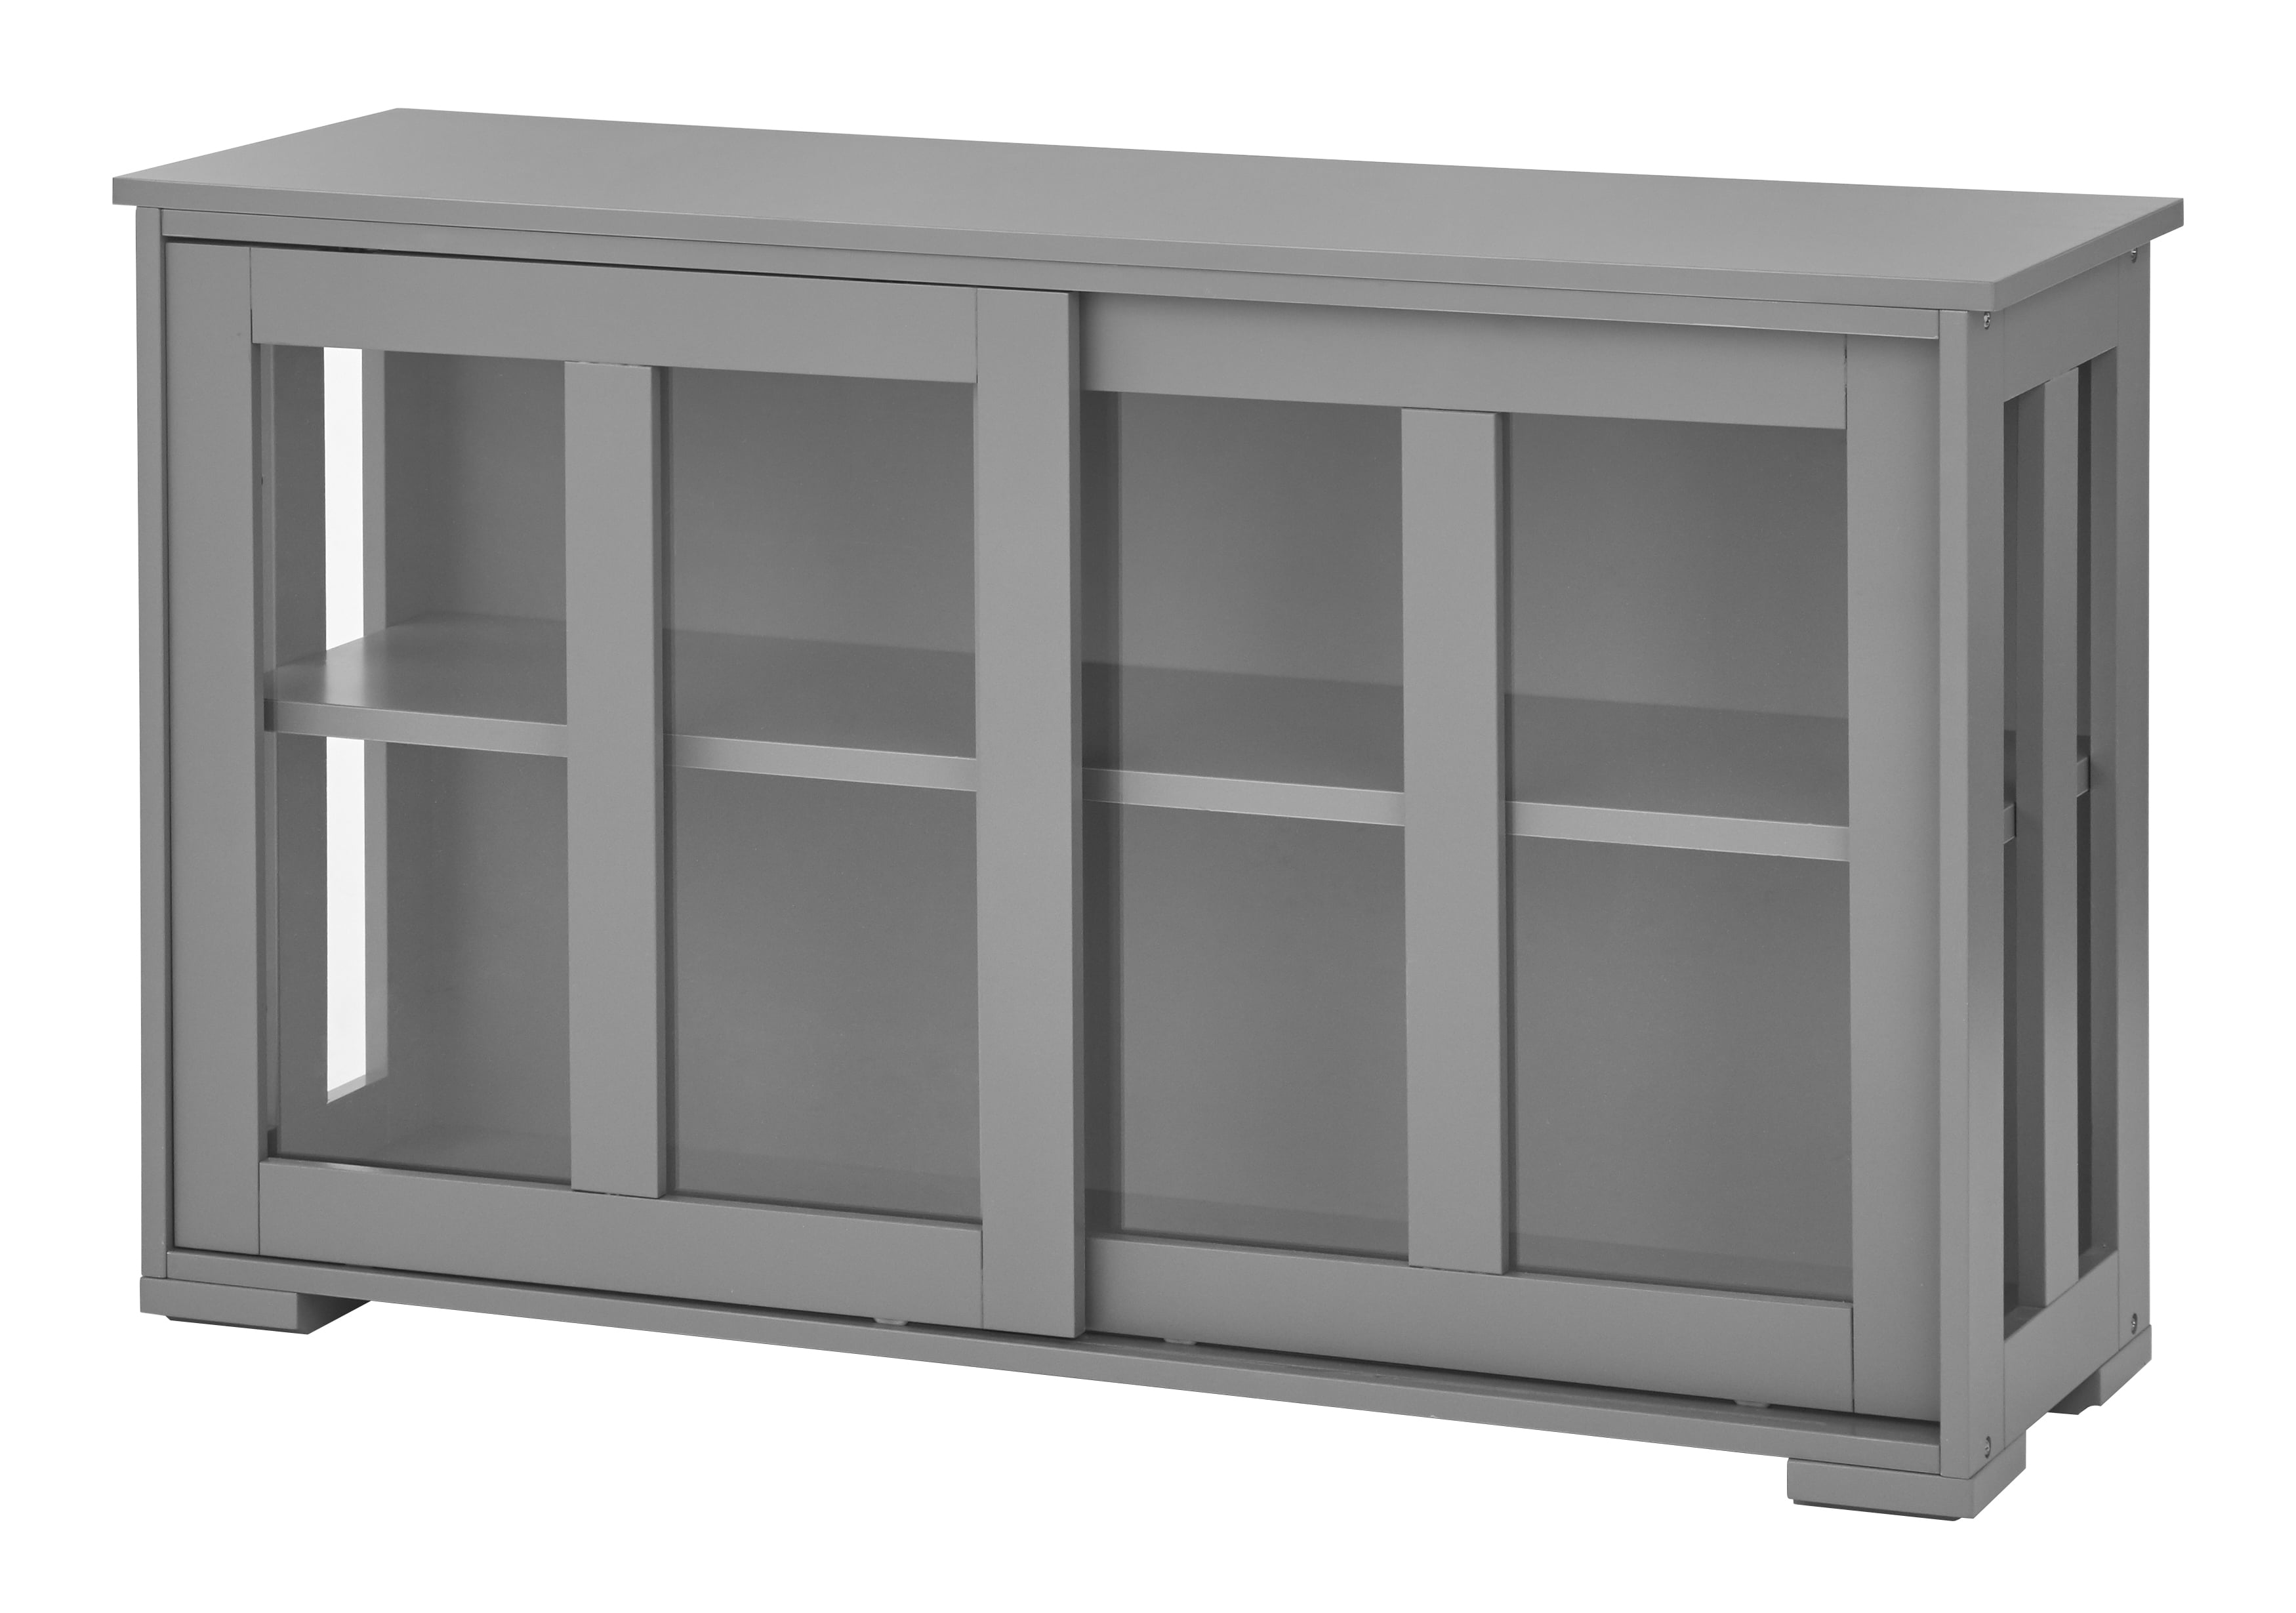 Target Marketing Systems Stackable Storage Cabinet with Wood Door